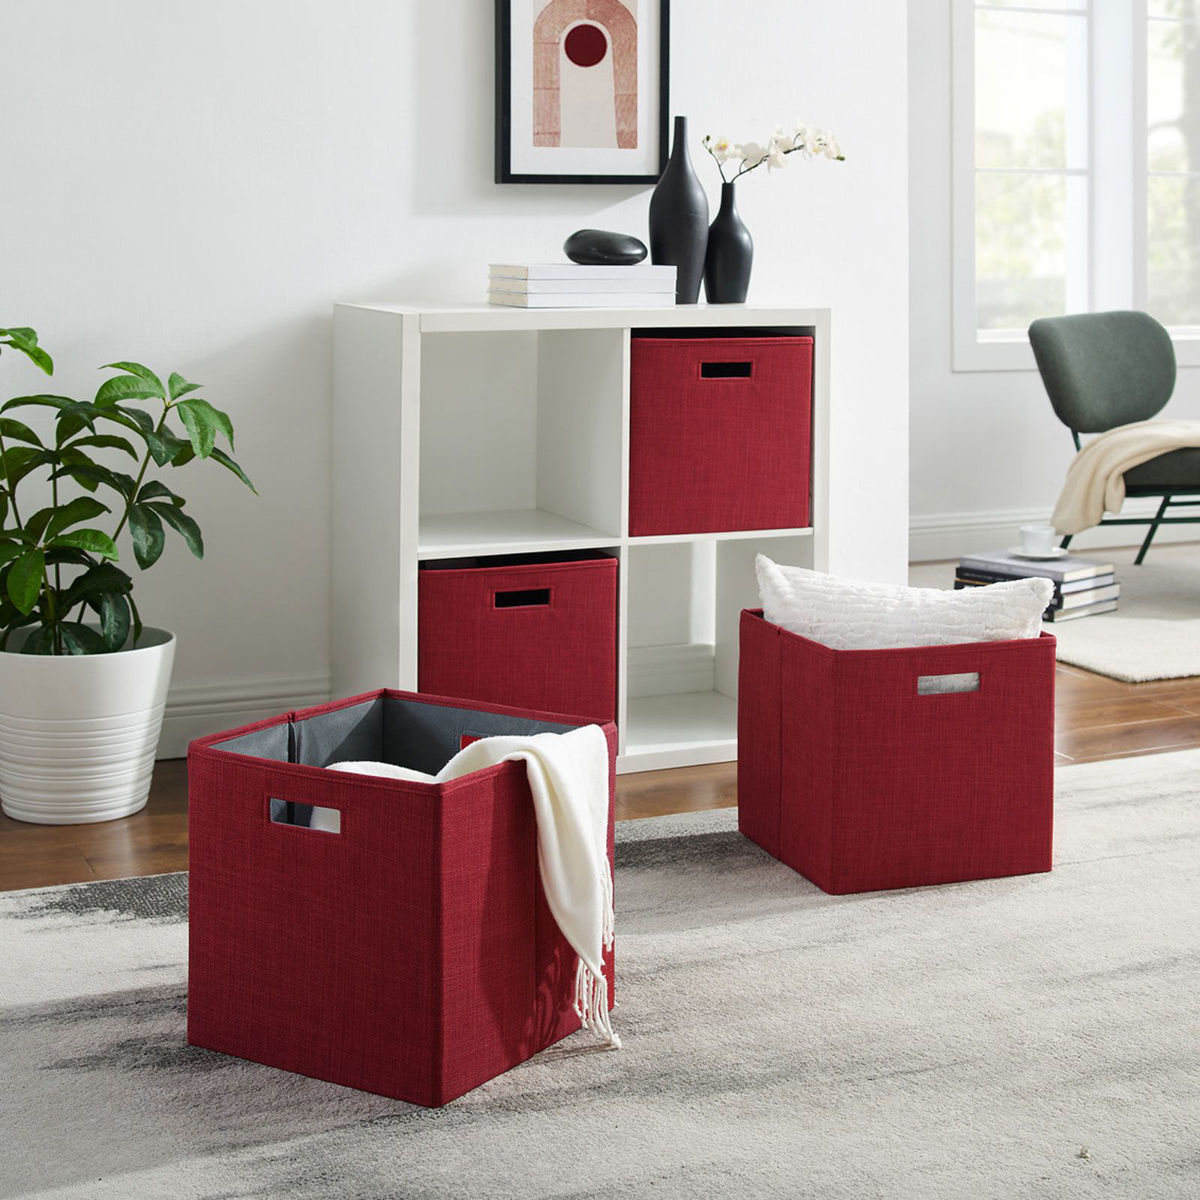 Picture of Cody Red Storage Bin